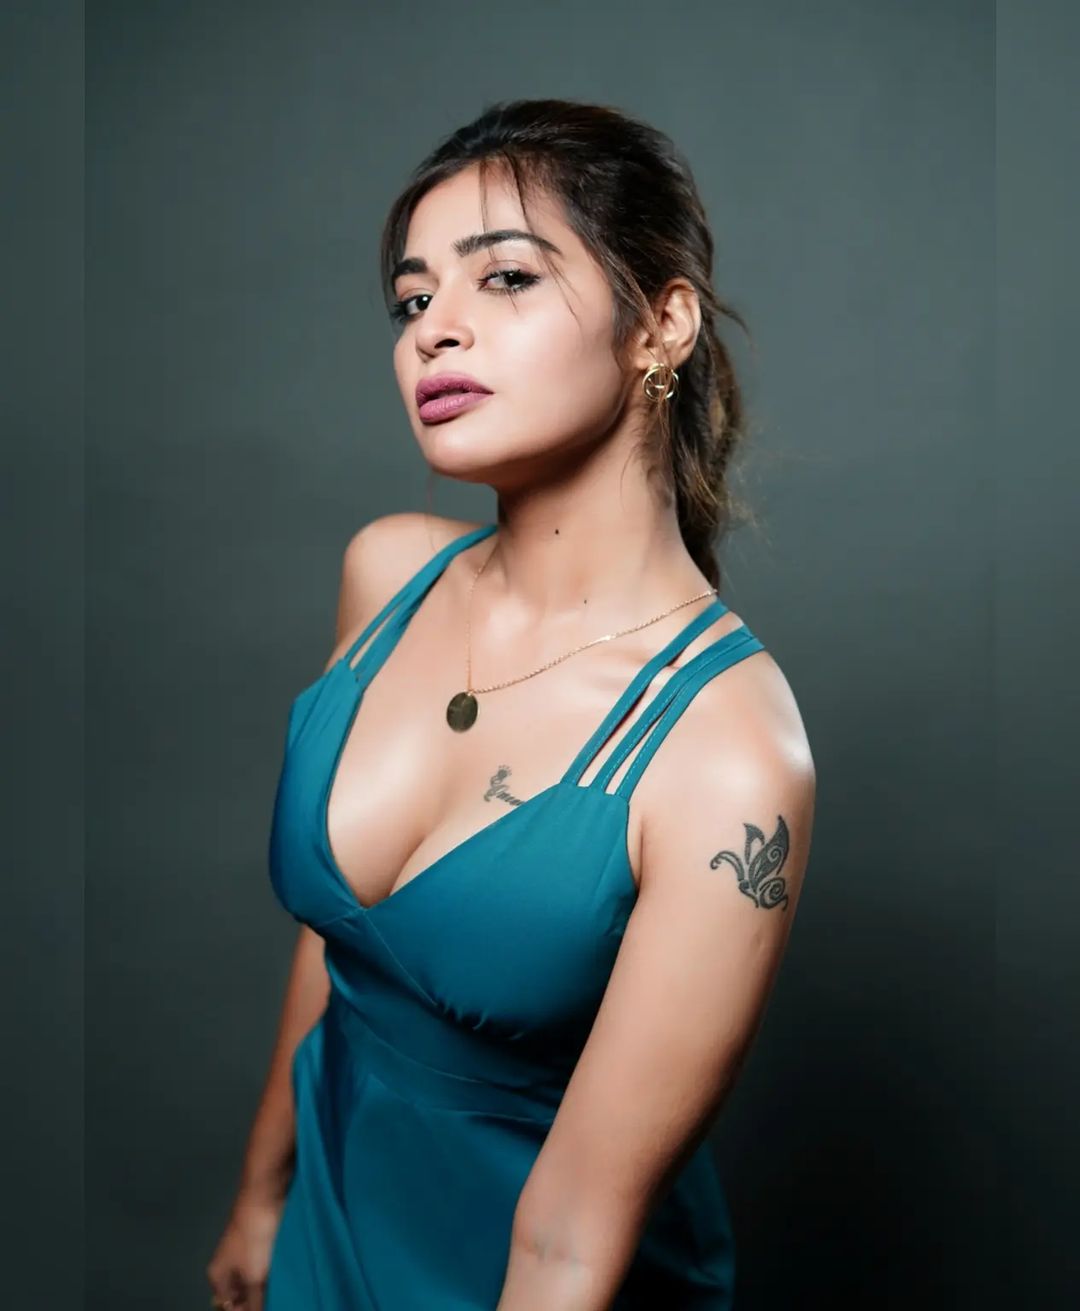 dharsha gupta hot photos in low neck glamour dress getting viral